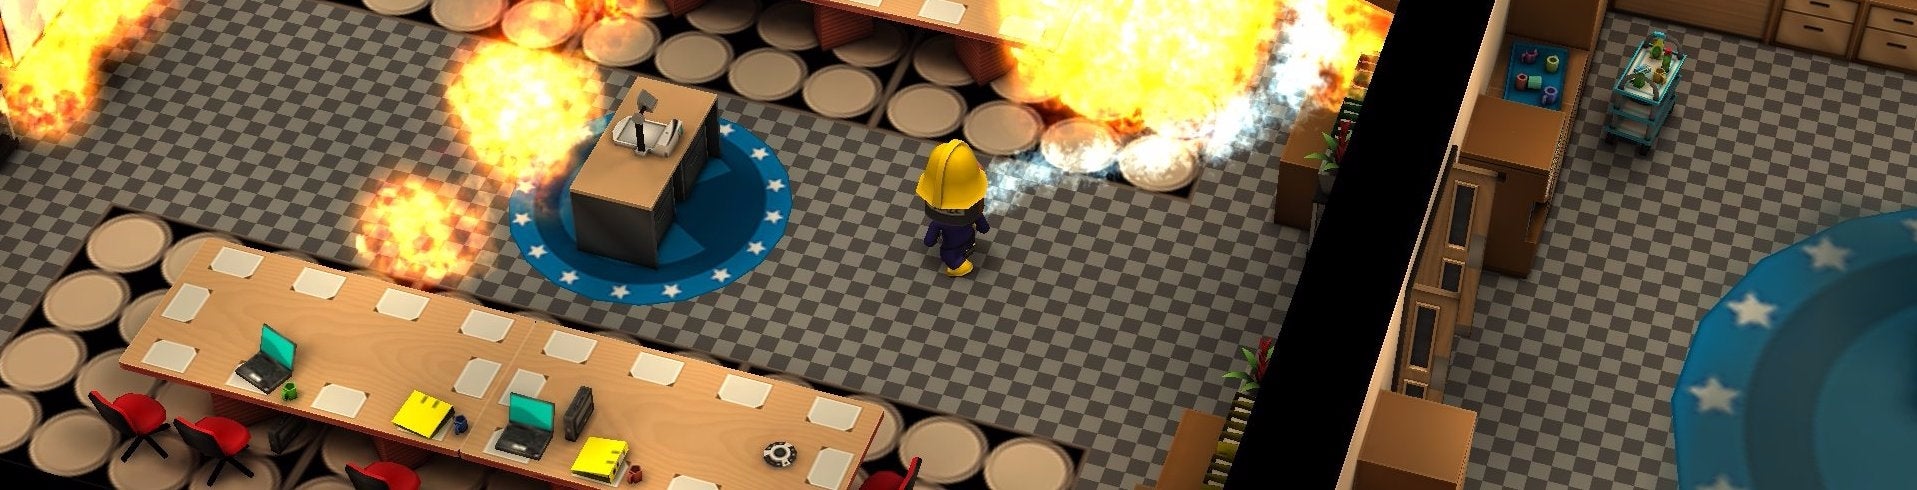 Image for Flame Over: Why aren't there more games about fire?